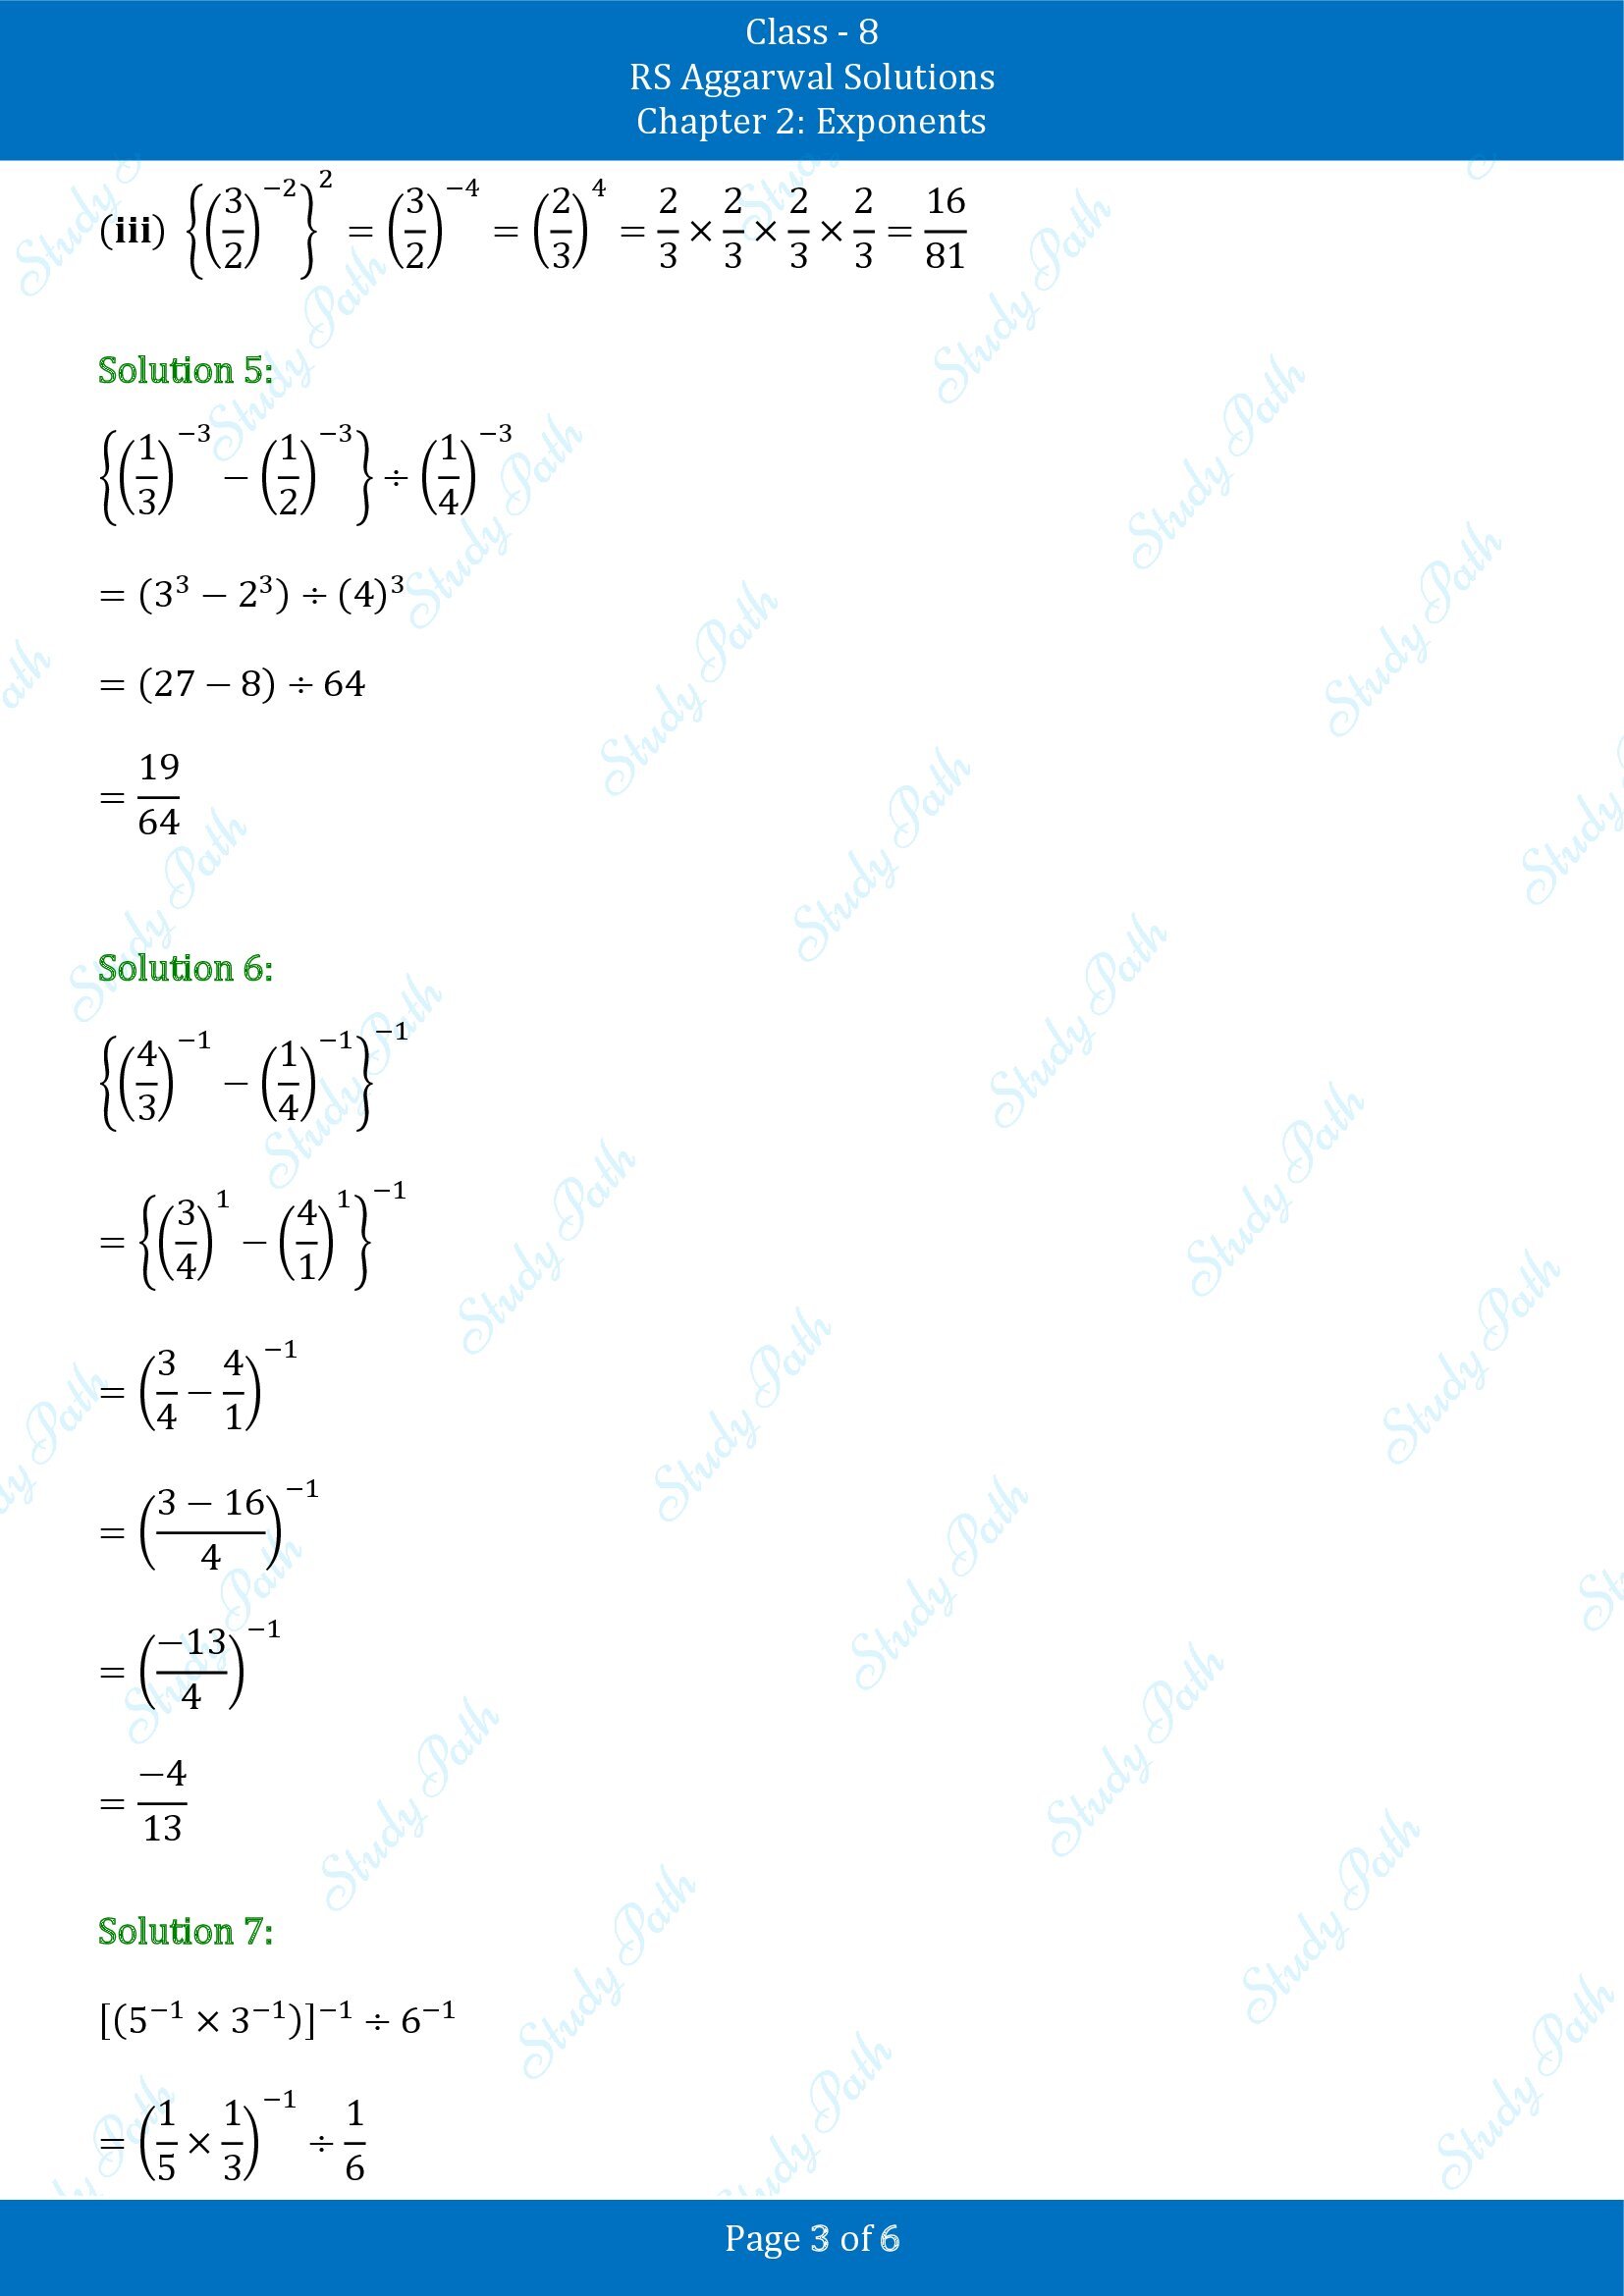 RS Aggarwal Solutions Class 8 Chapter 2 Exponents Exercise 2A 00003